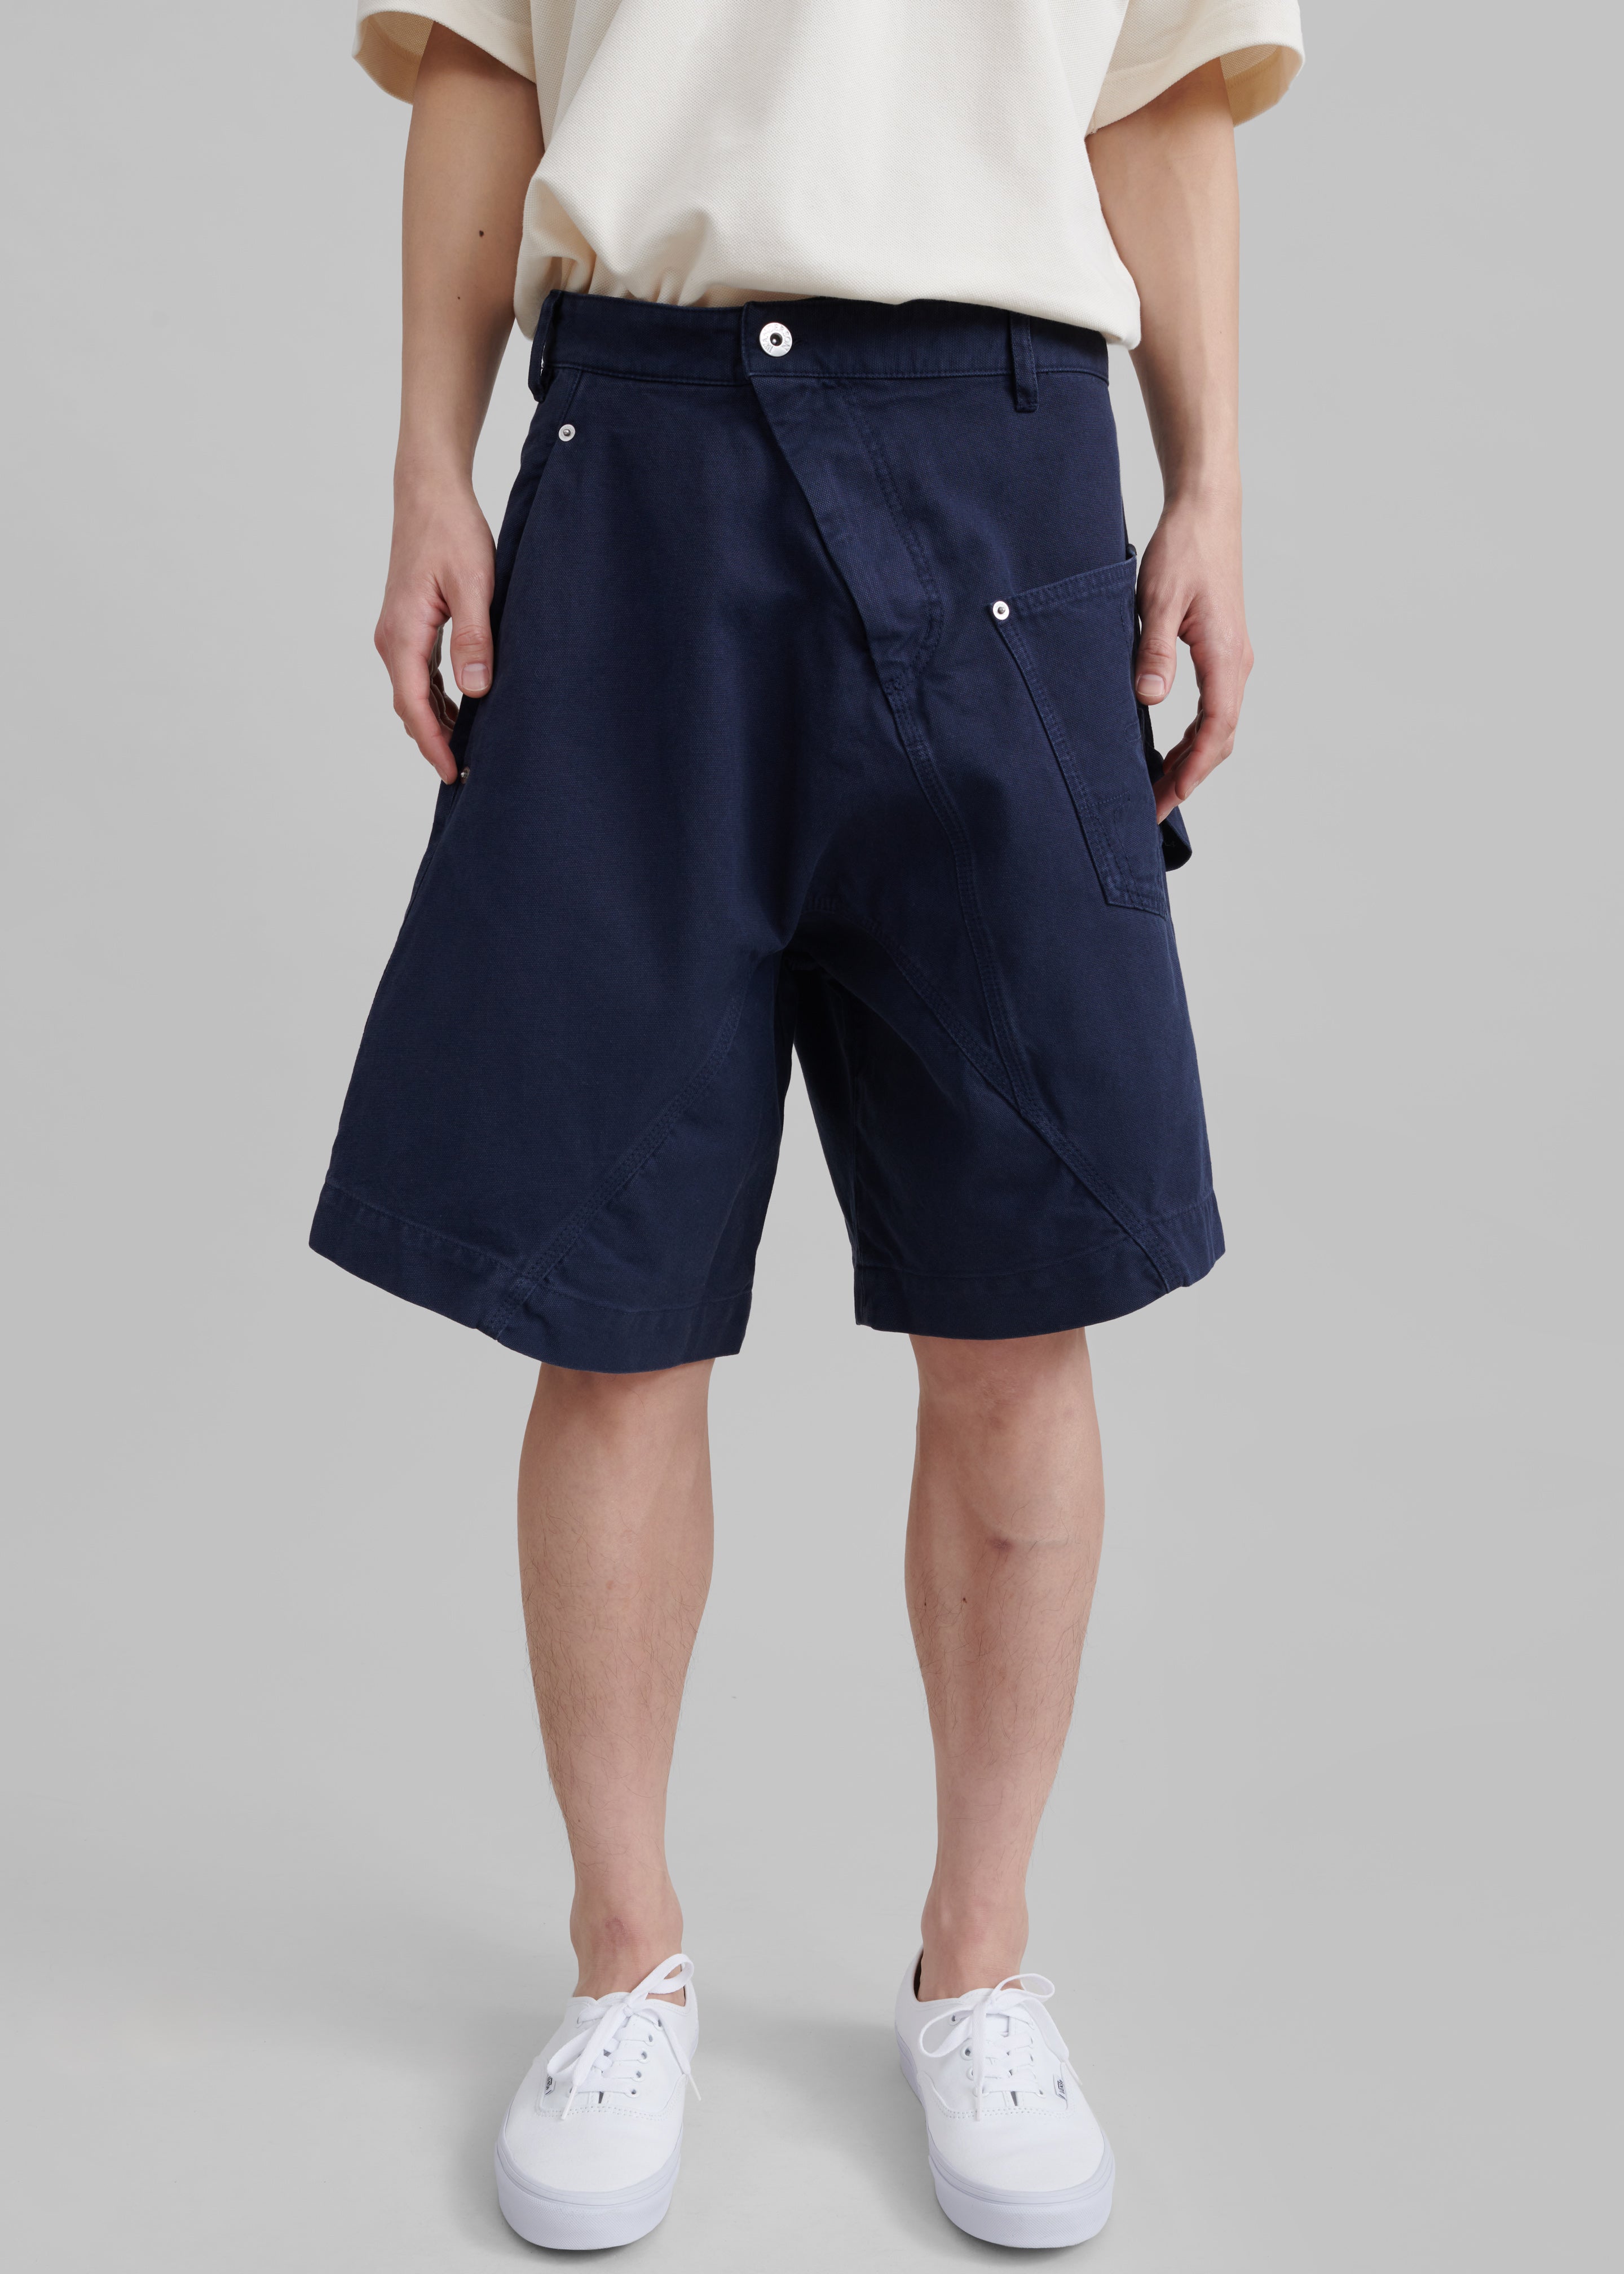 JW Anderson Twisted Shorts - Navy - 2